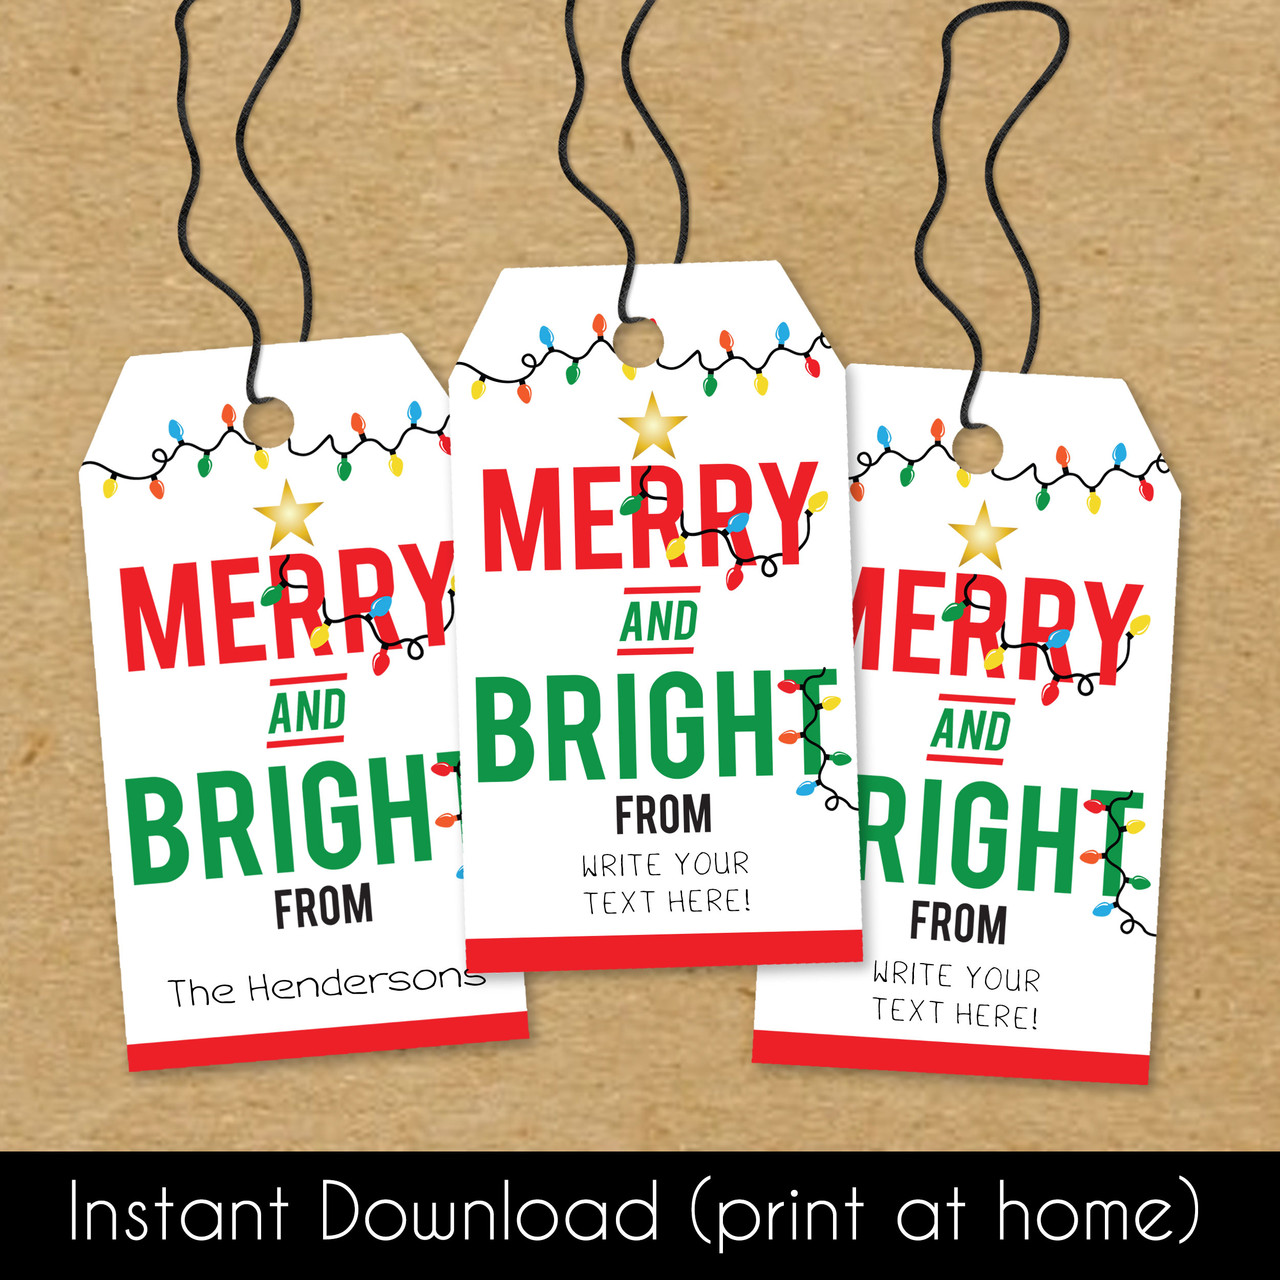 https://cdn11.bigcommerce.com/s-5grzuu6/images/stencil/1280x1280/products/5951/44198/Merry-and-Bright-Downloadable-Christmas_Tags__83244.1637626980.jpg?c=2